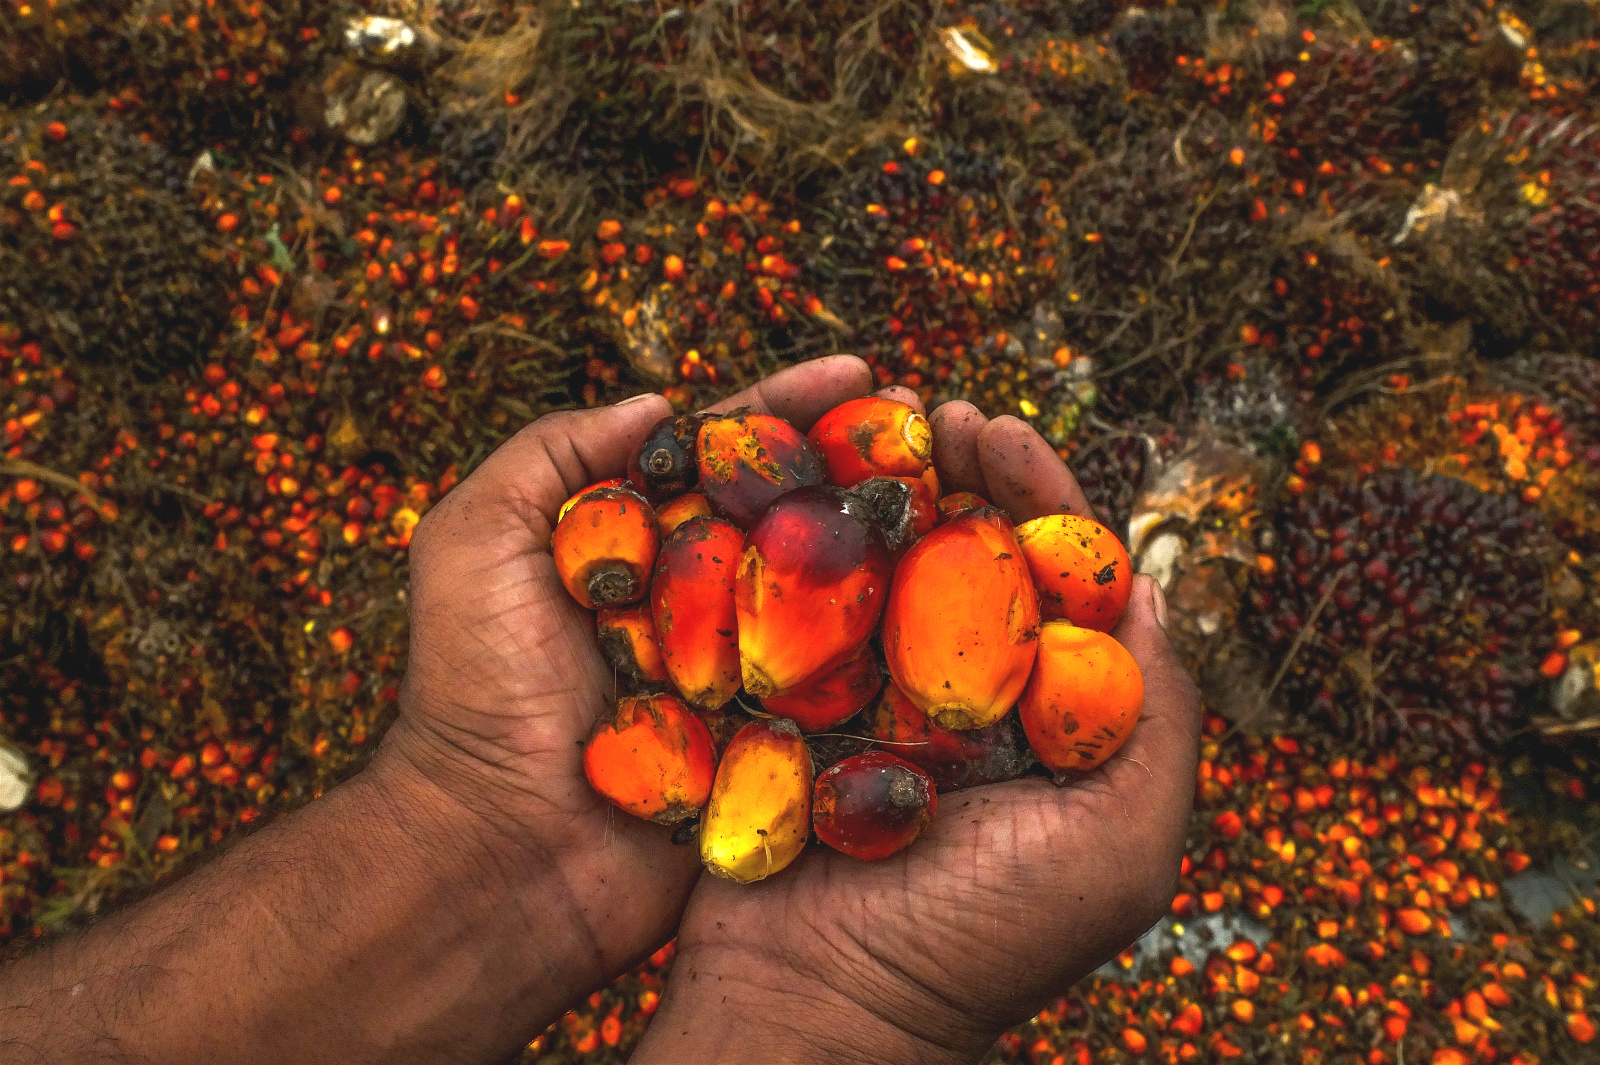 Is palm oil good for you? 7 things to know about it